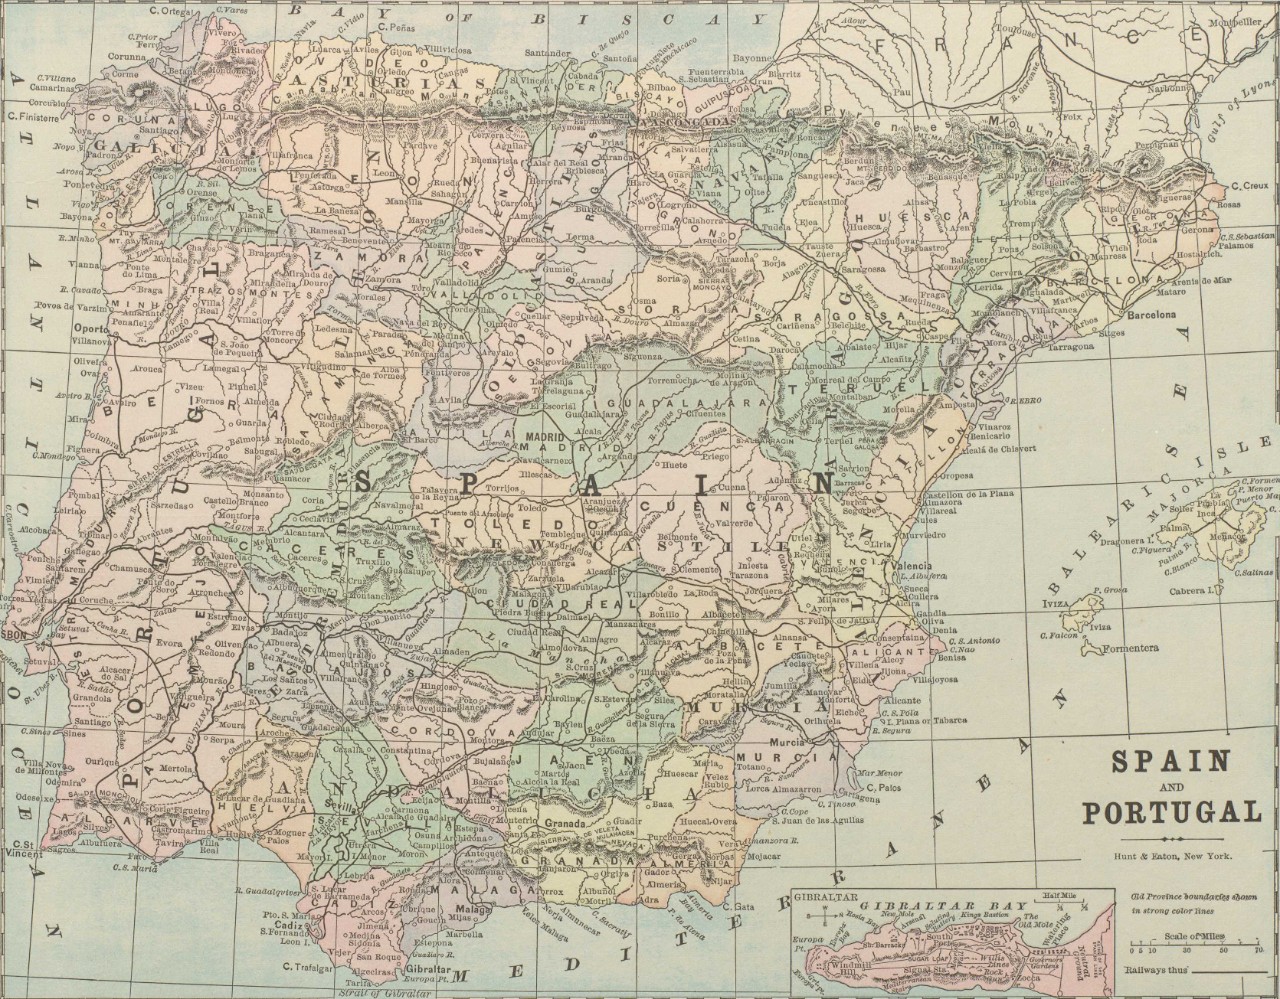 A contemporary map of Spain, which was published at the time of the Spanish-American War.